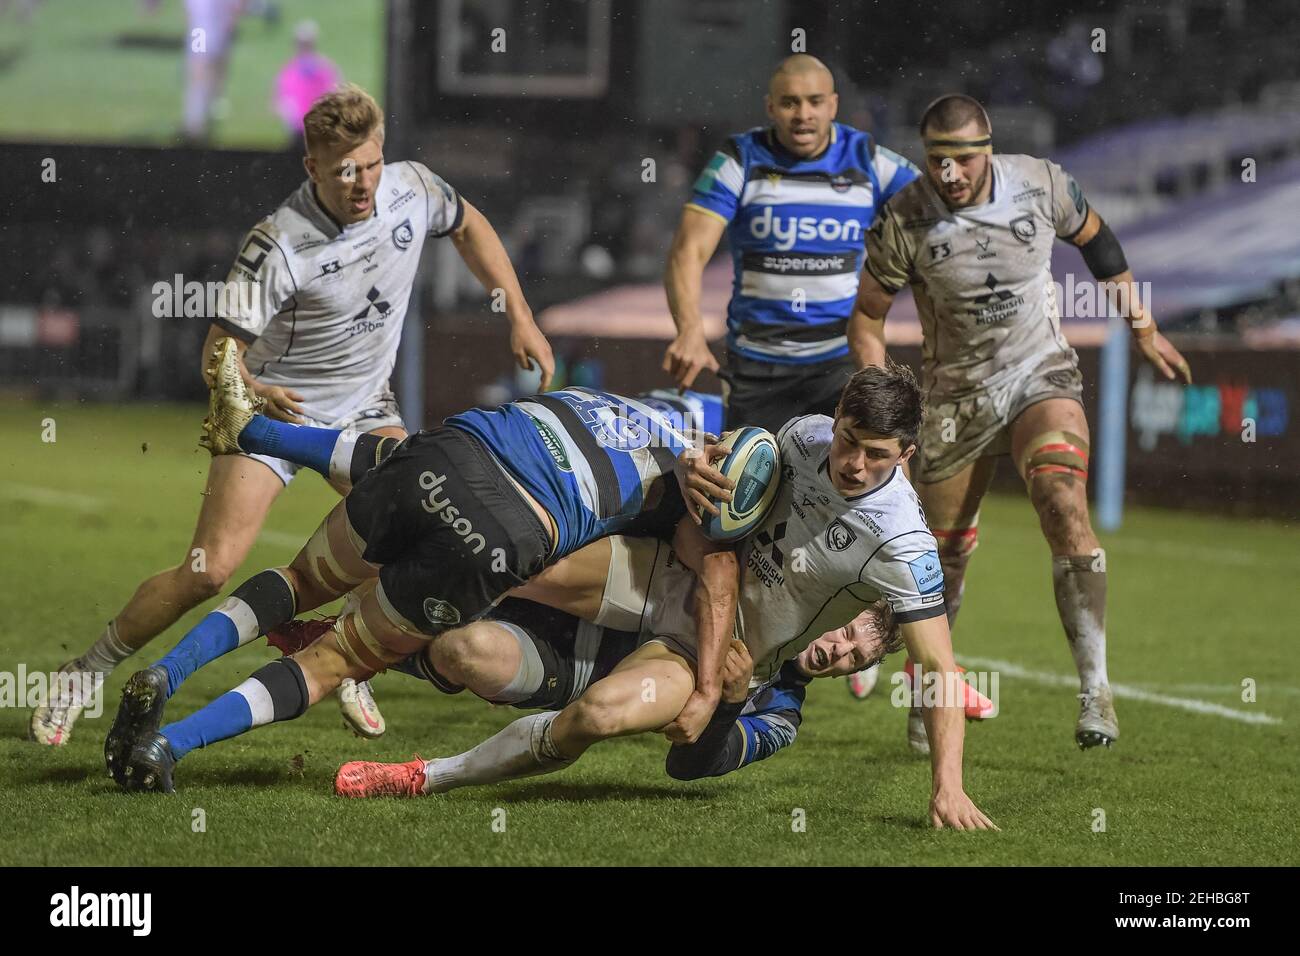 Bath, UK. 19th Feb, 2021. Louis Rees-Zammit #14 of Gloucester rugby is tackled just short of the Bath try line by Tom Ellis #19 of Bath Rugby in Bath, UK on 2/19/2021. (Photo by Gareth Dalley/News Images/Sipa USA) Credit: Sipa USA/Alamy Live News Stock Photo